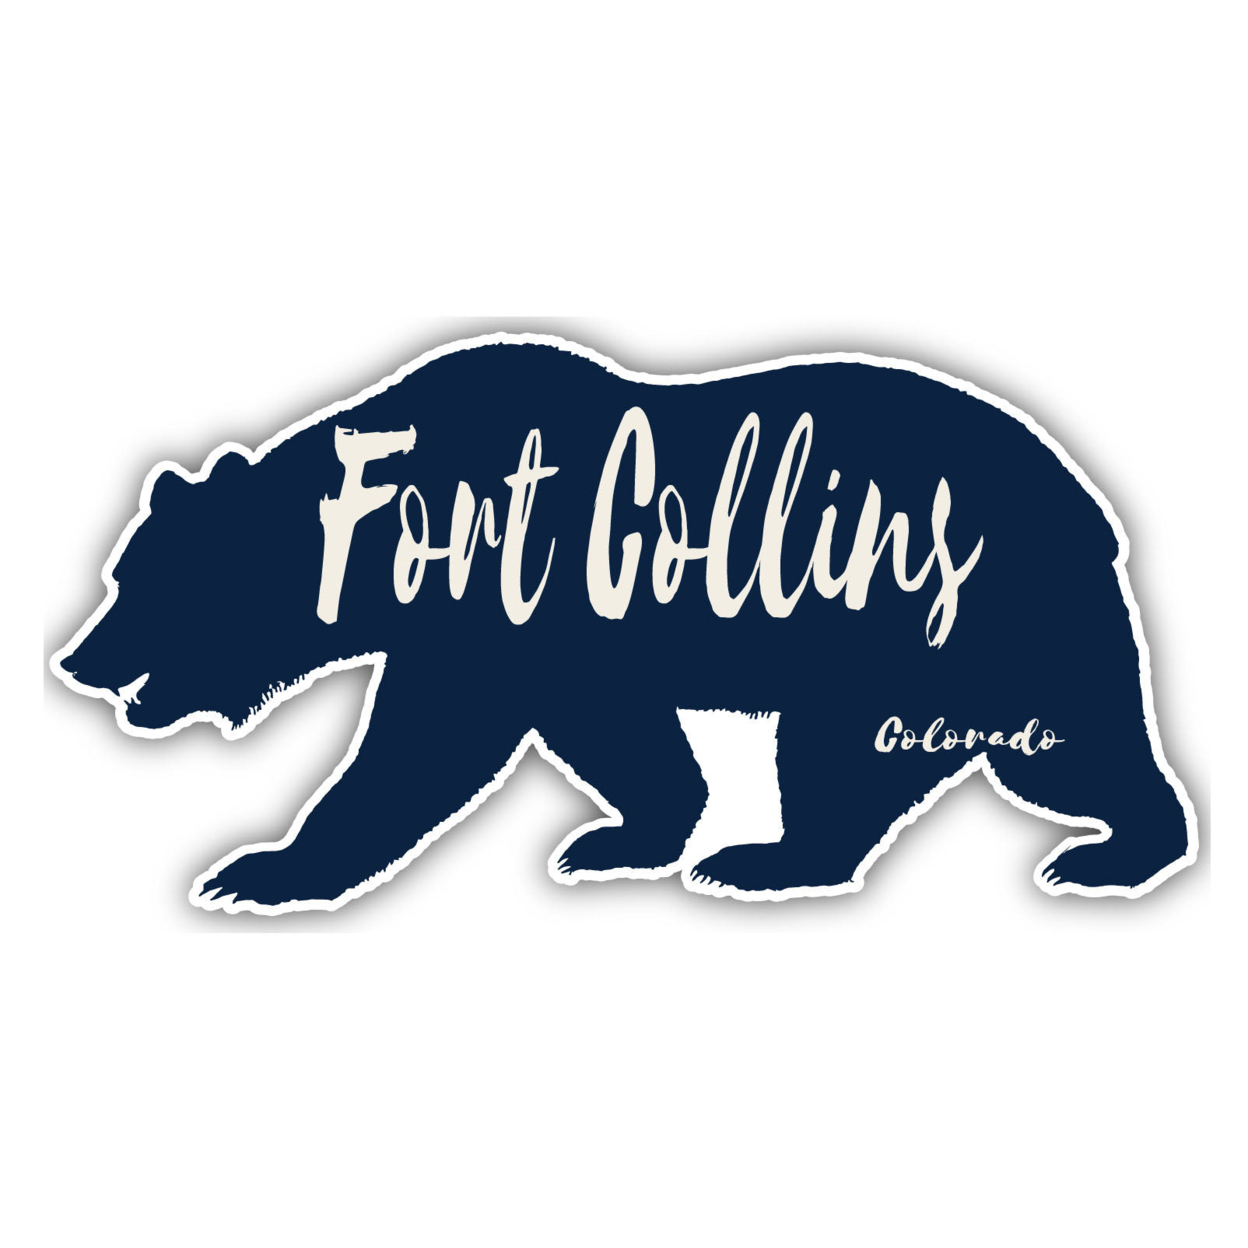 Fort Collins Colorado Souvenir Decorative Stickers (Choose Theme And Size) - 4-Pack, 6-Inch, Bear